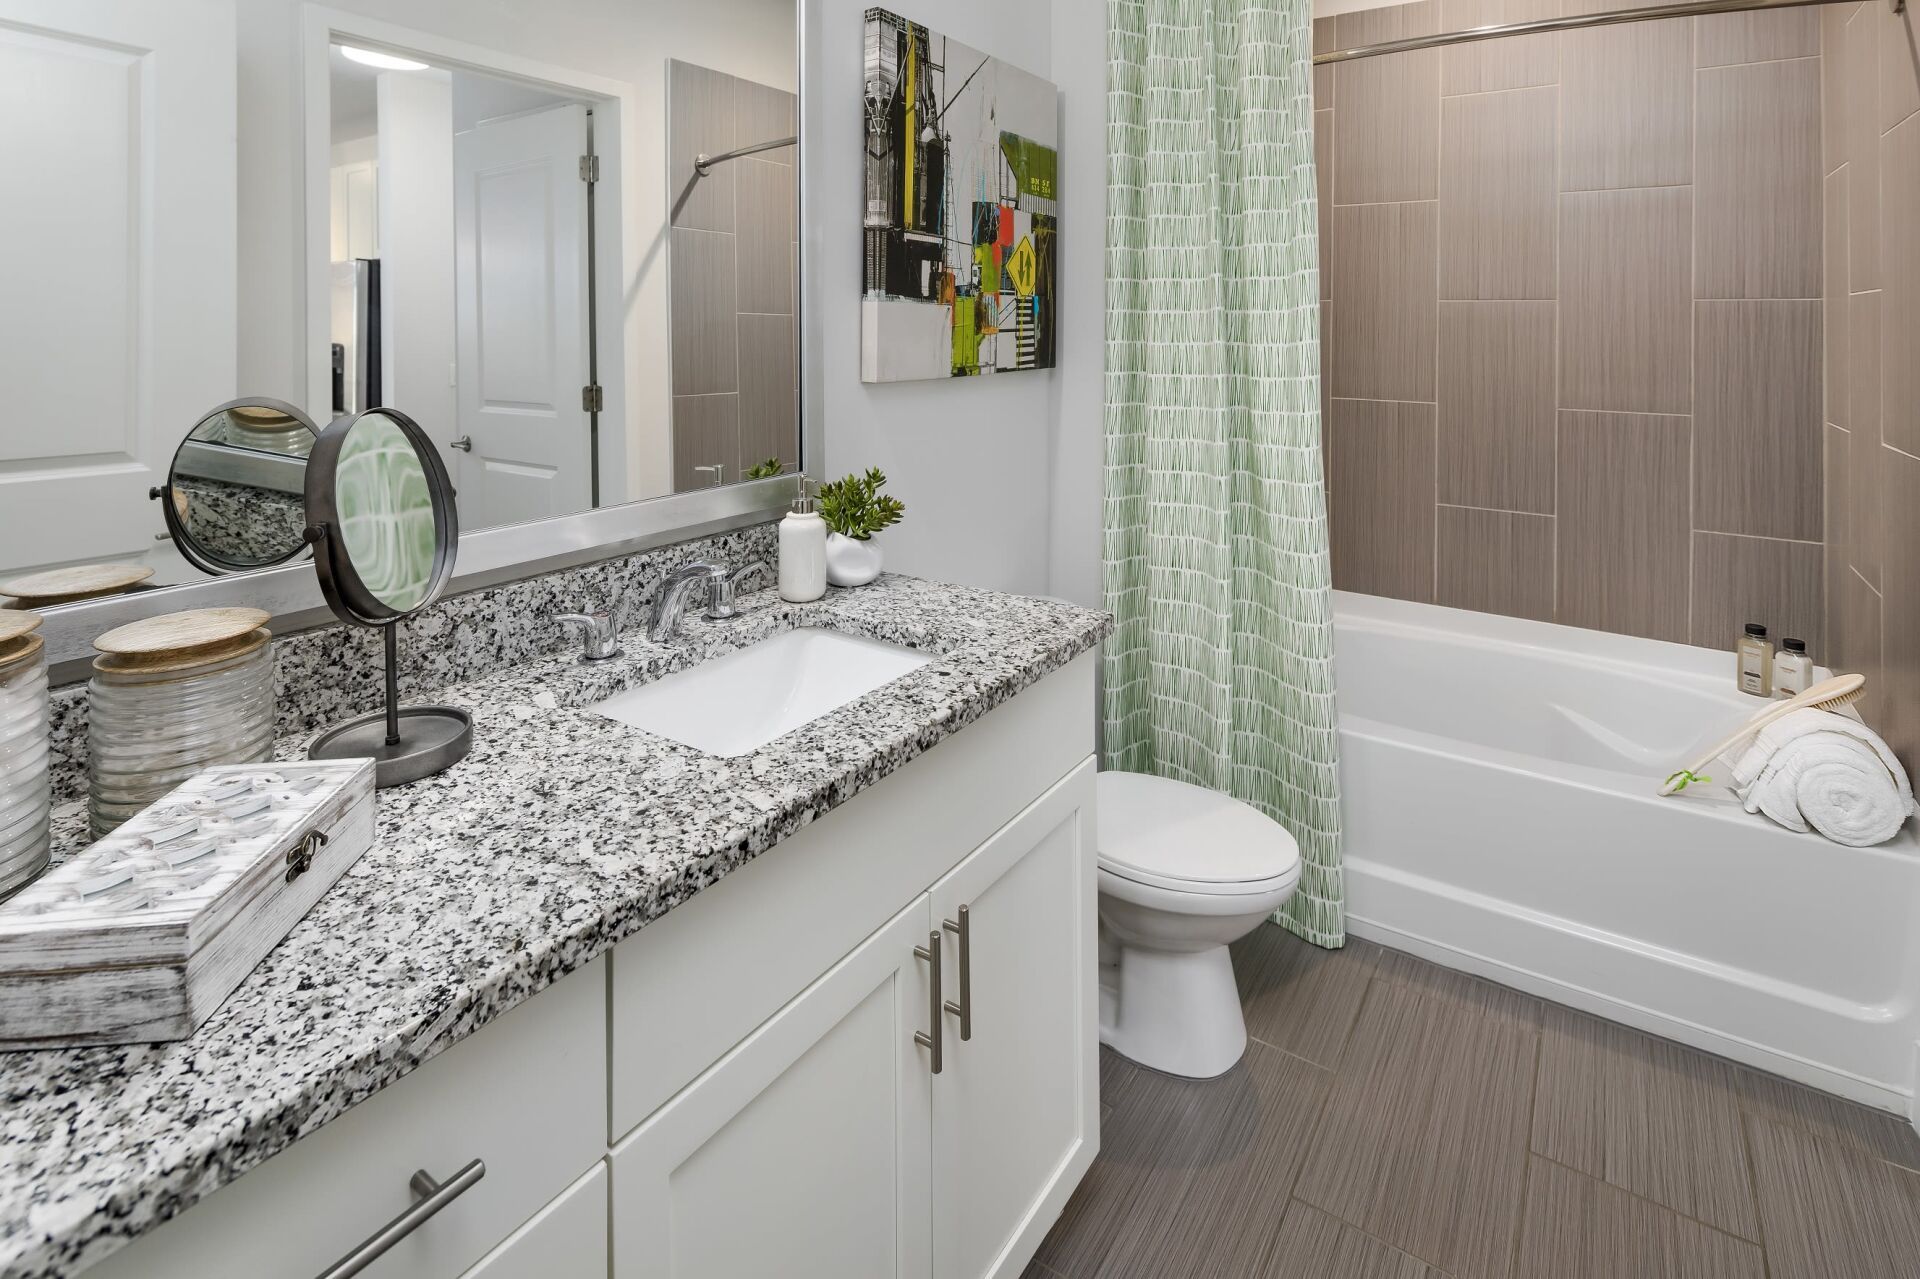 Central Station on Orange | Bathroom with Double Sinks